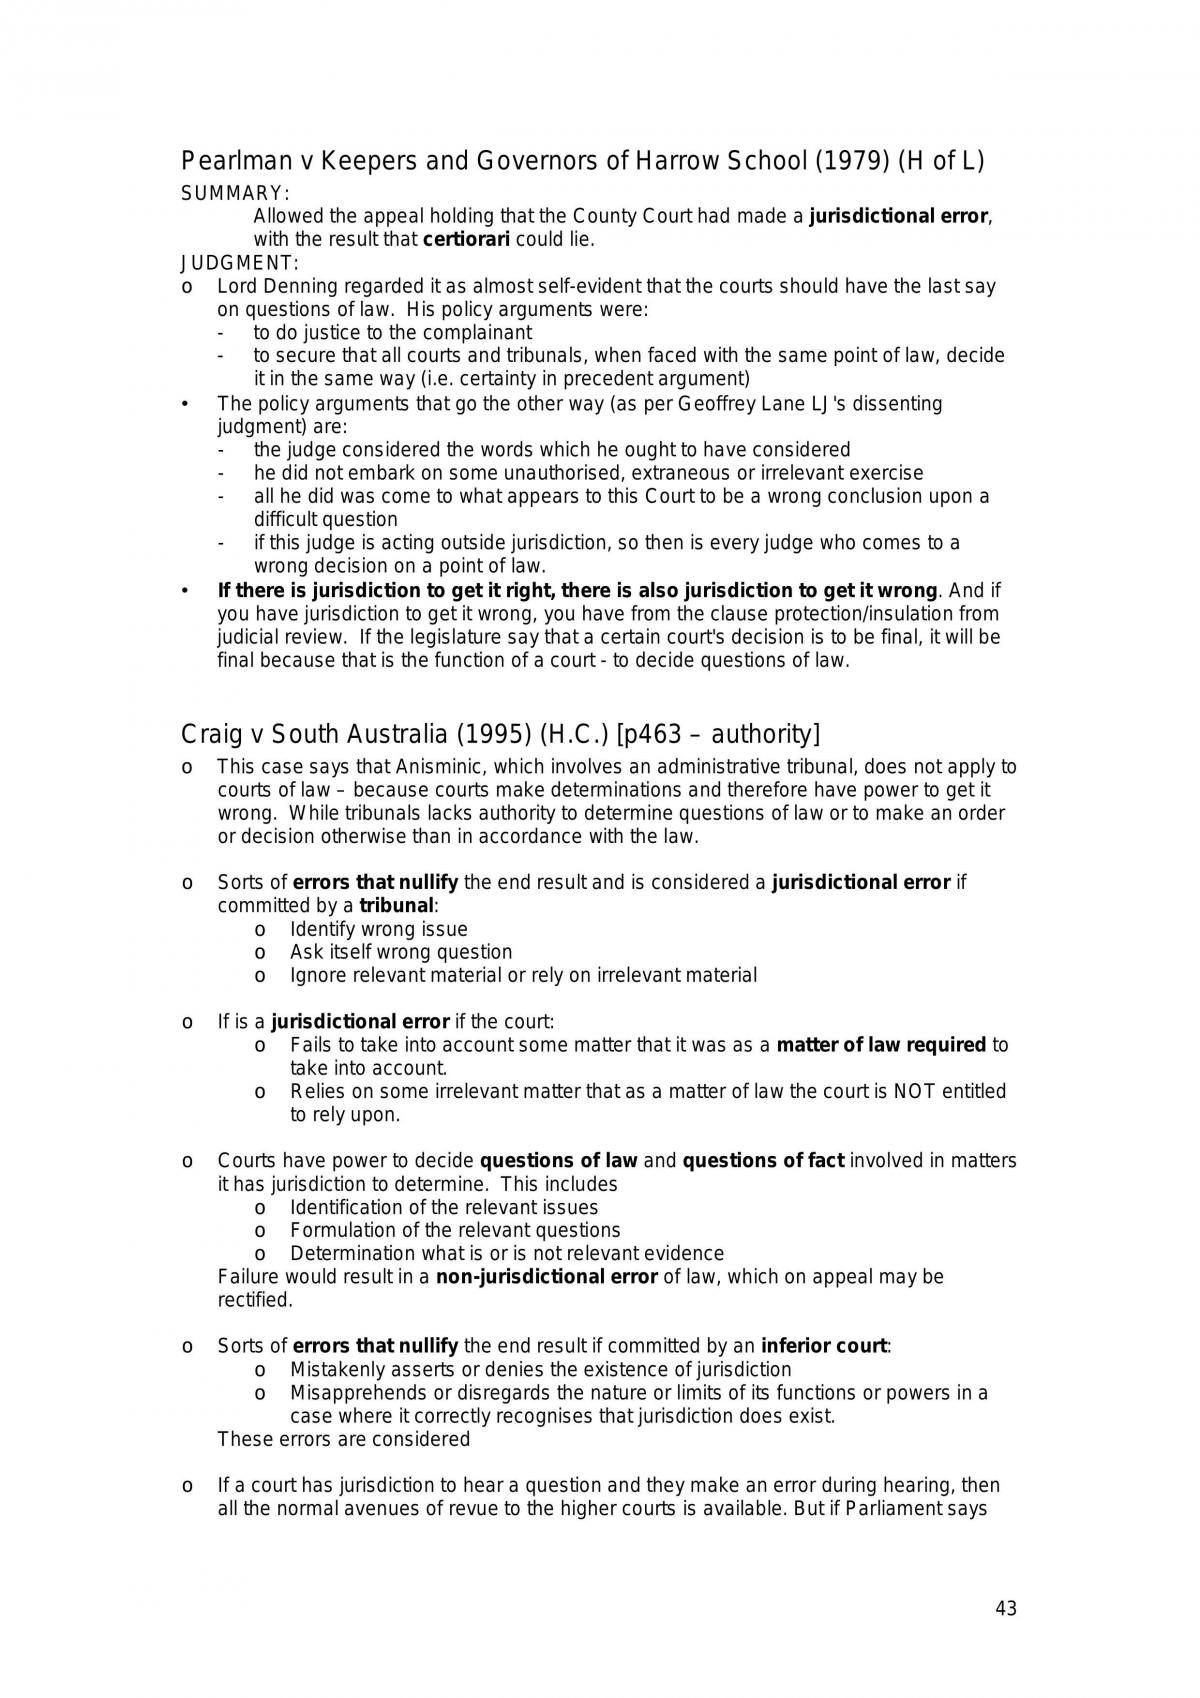 Admin Law Summary Notes - Page 43